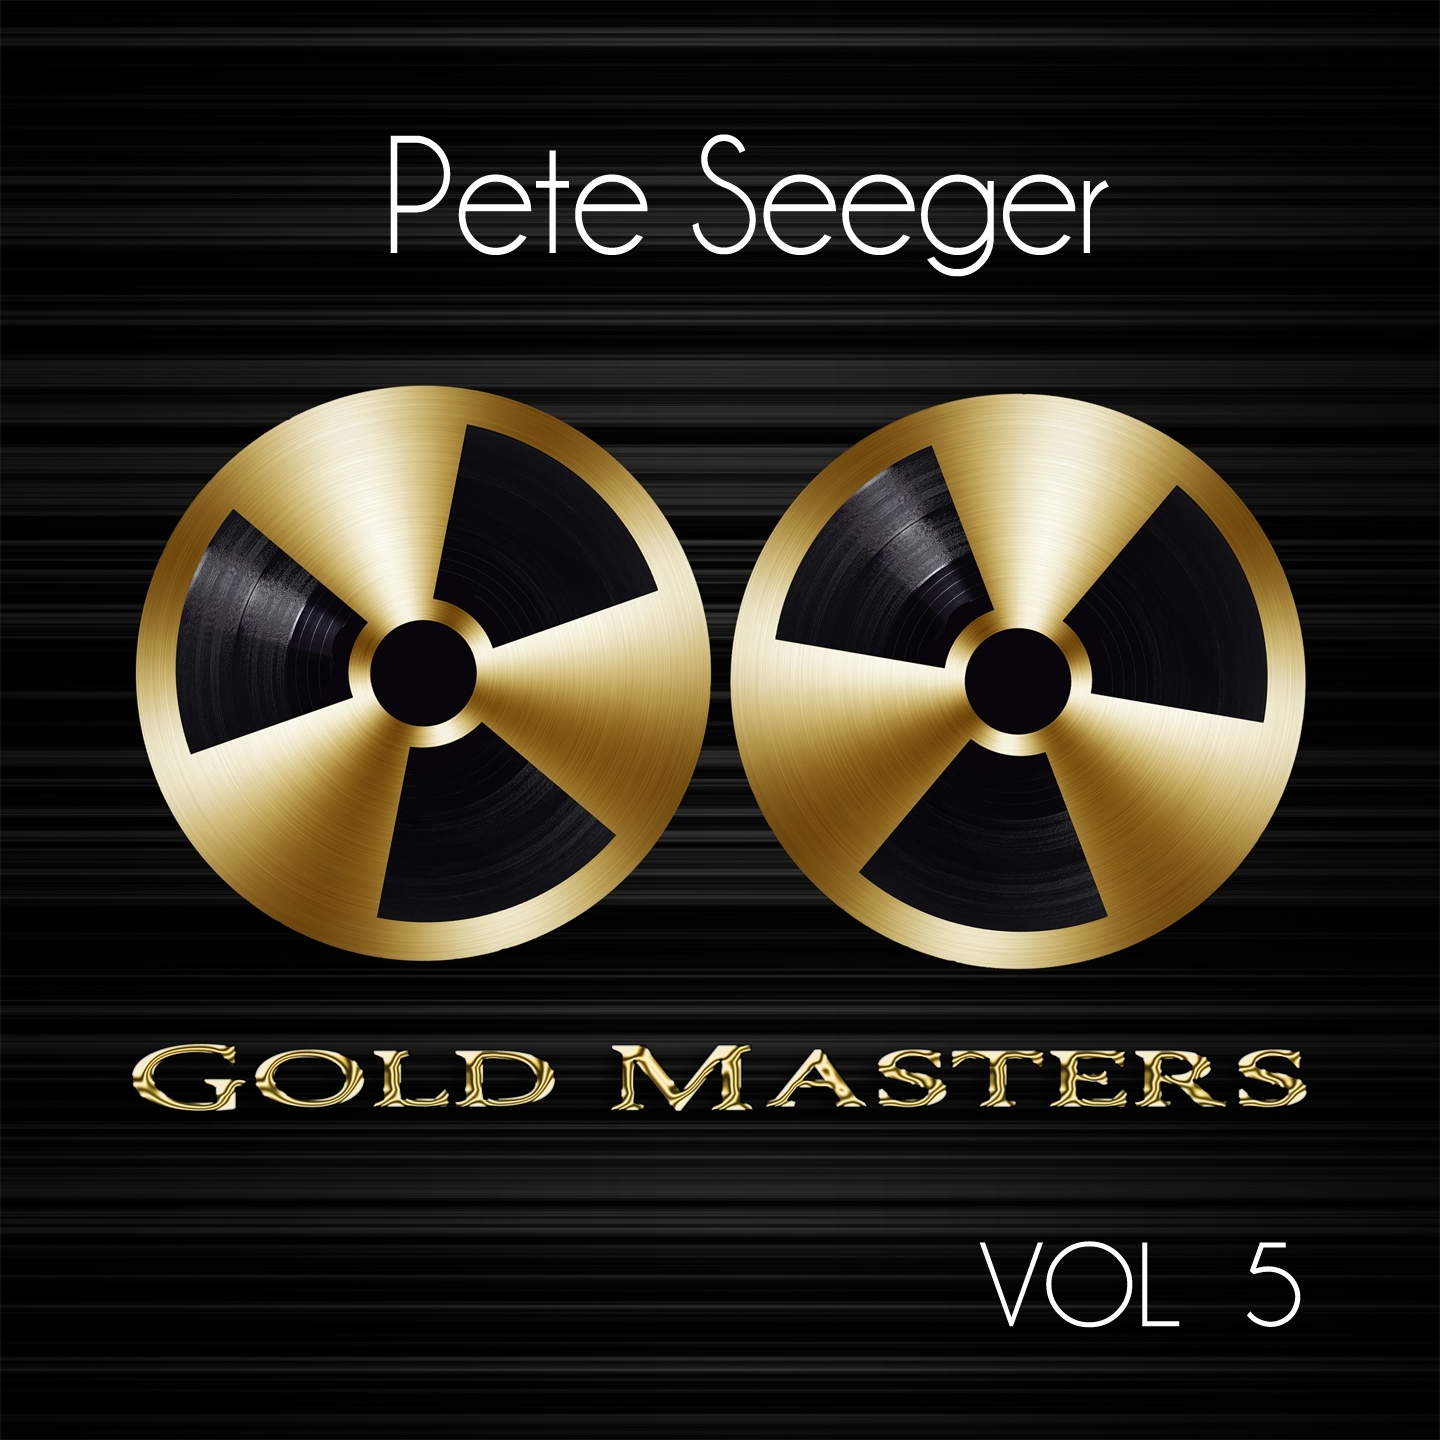 Gold Masters: Pete Seeger, Vol. 5